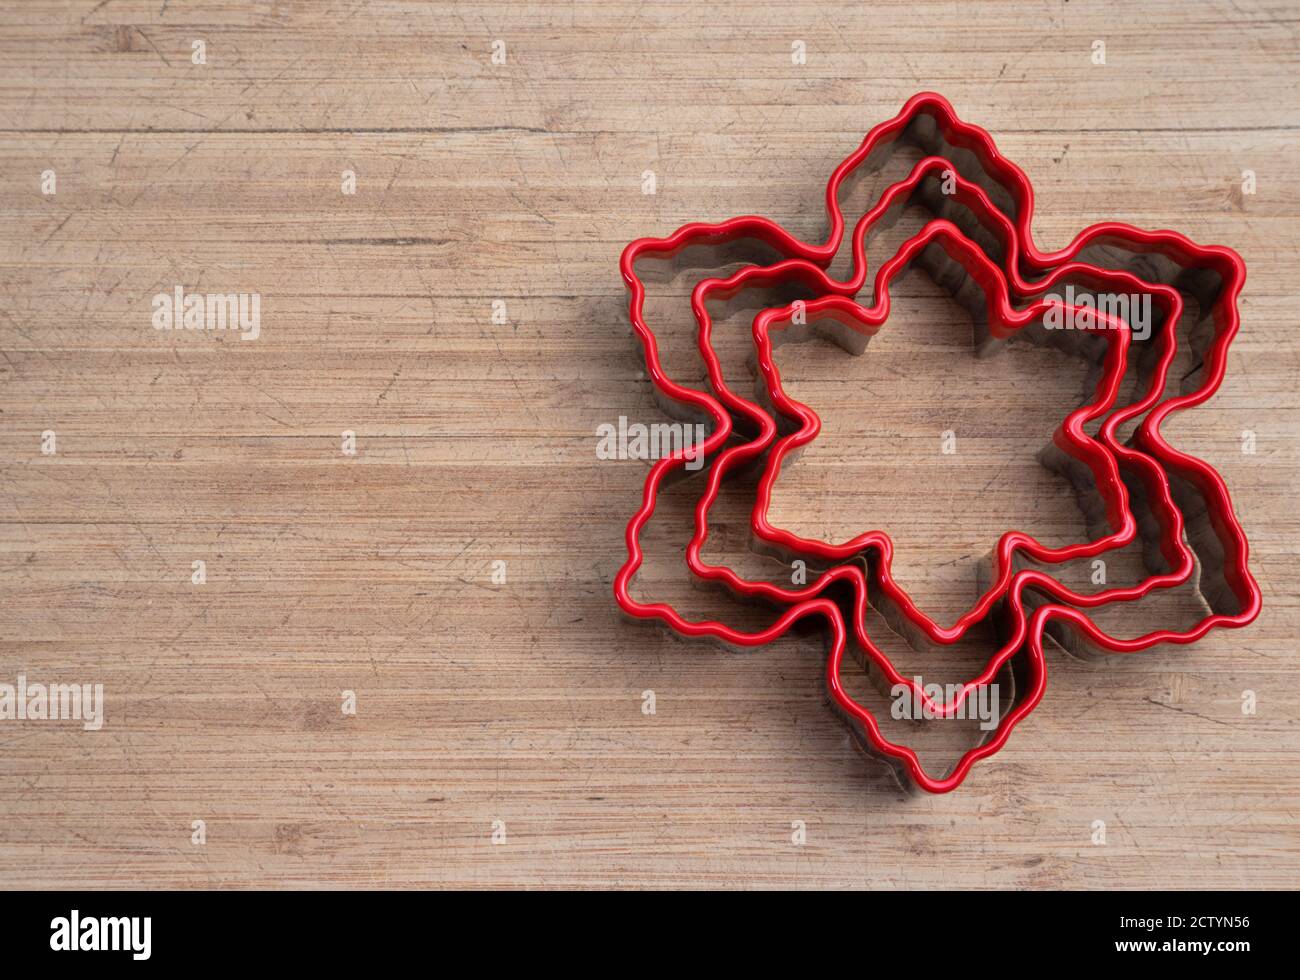 Red snowflake cookie cutter on wood cutting board. Holiday concept. Copy space. Stock Photo